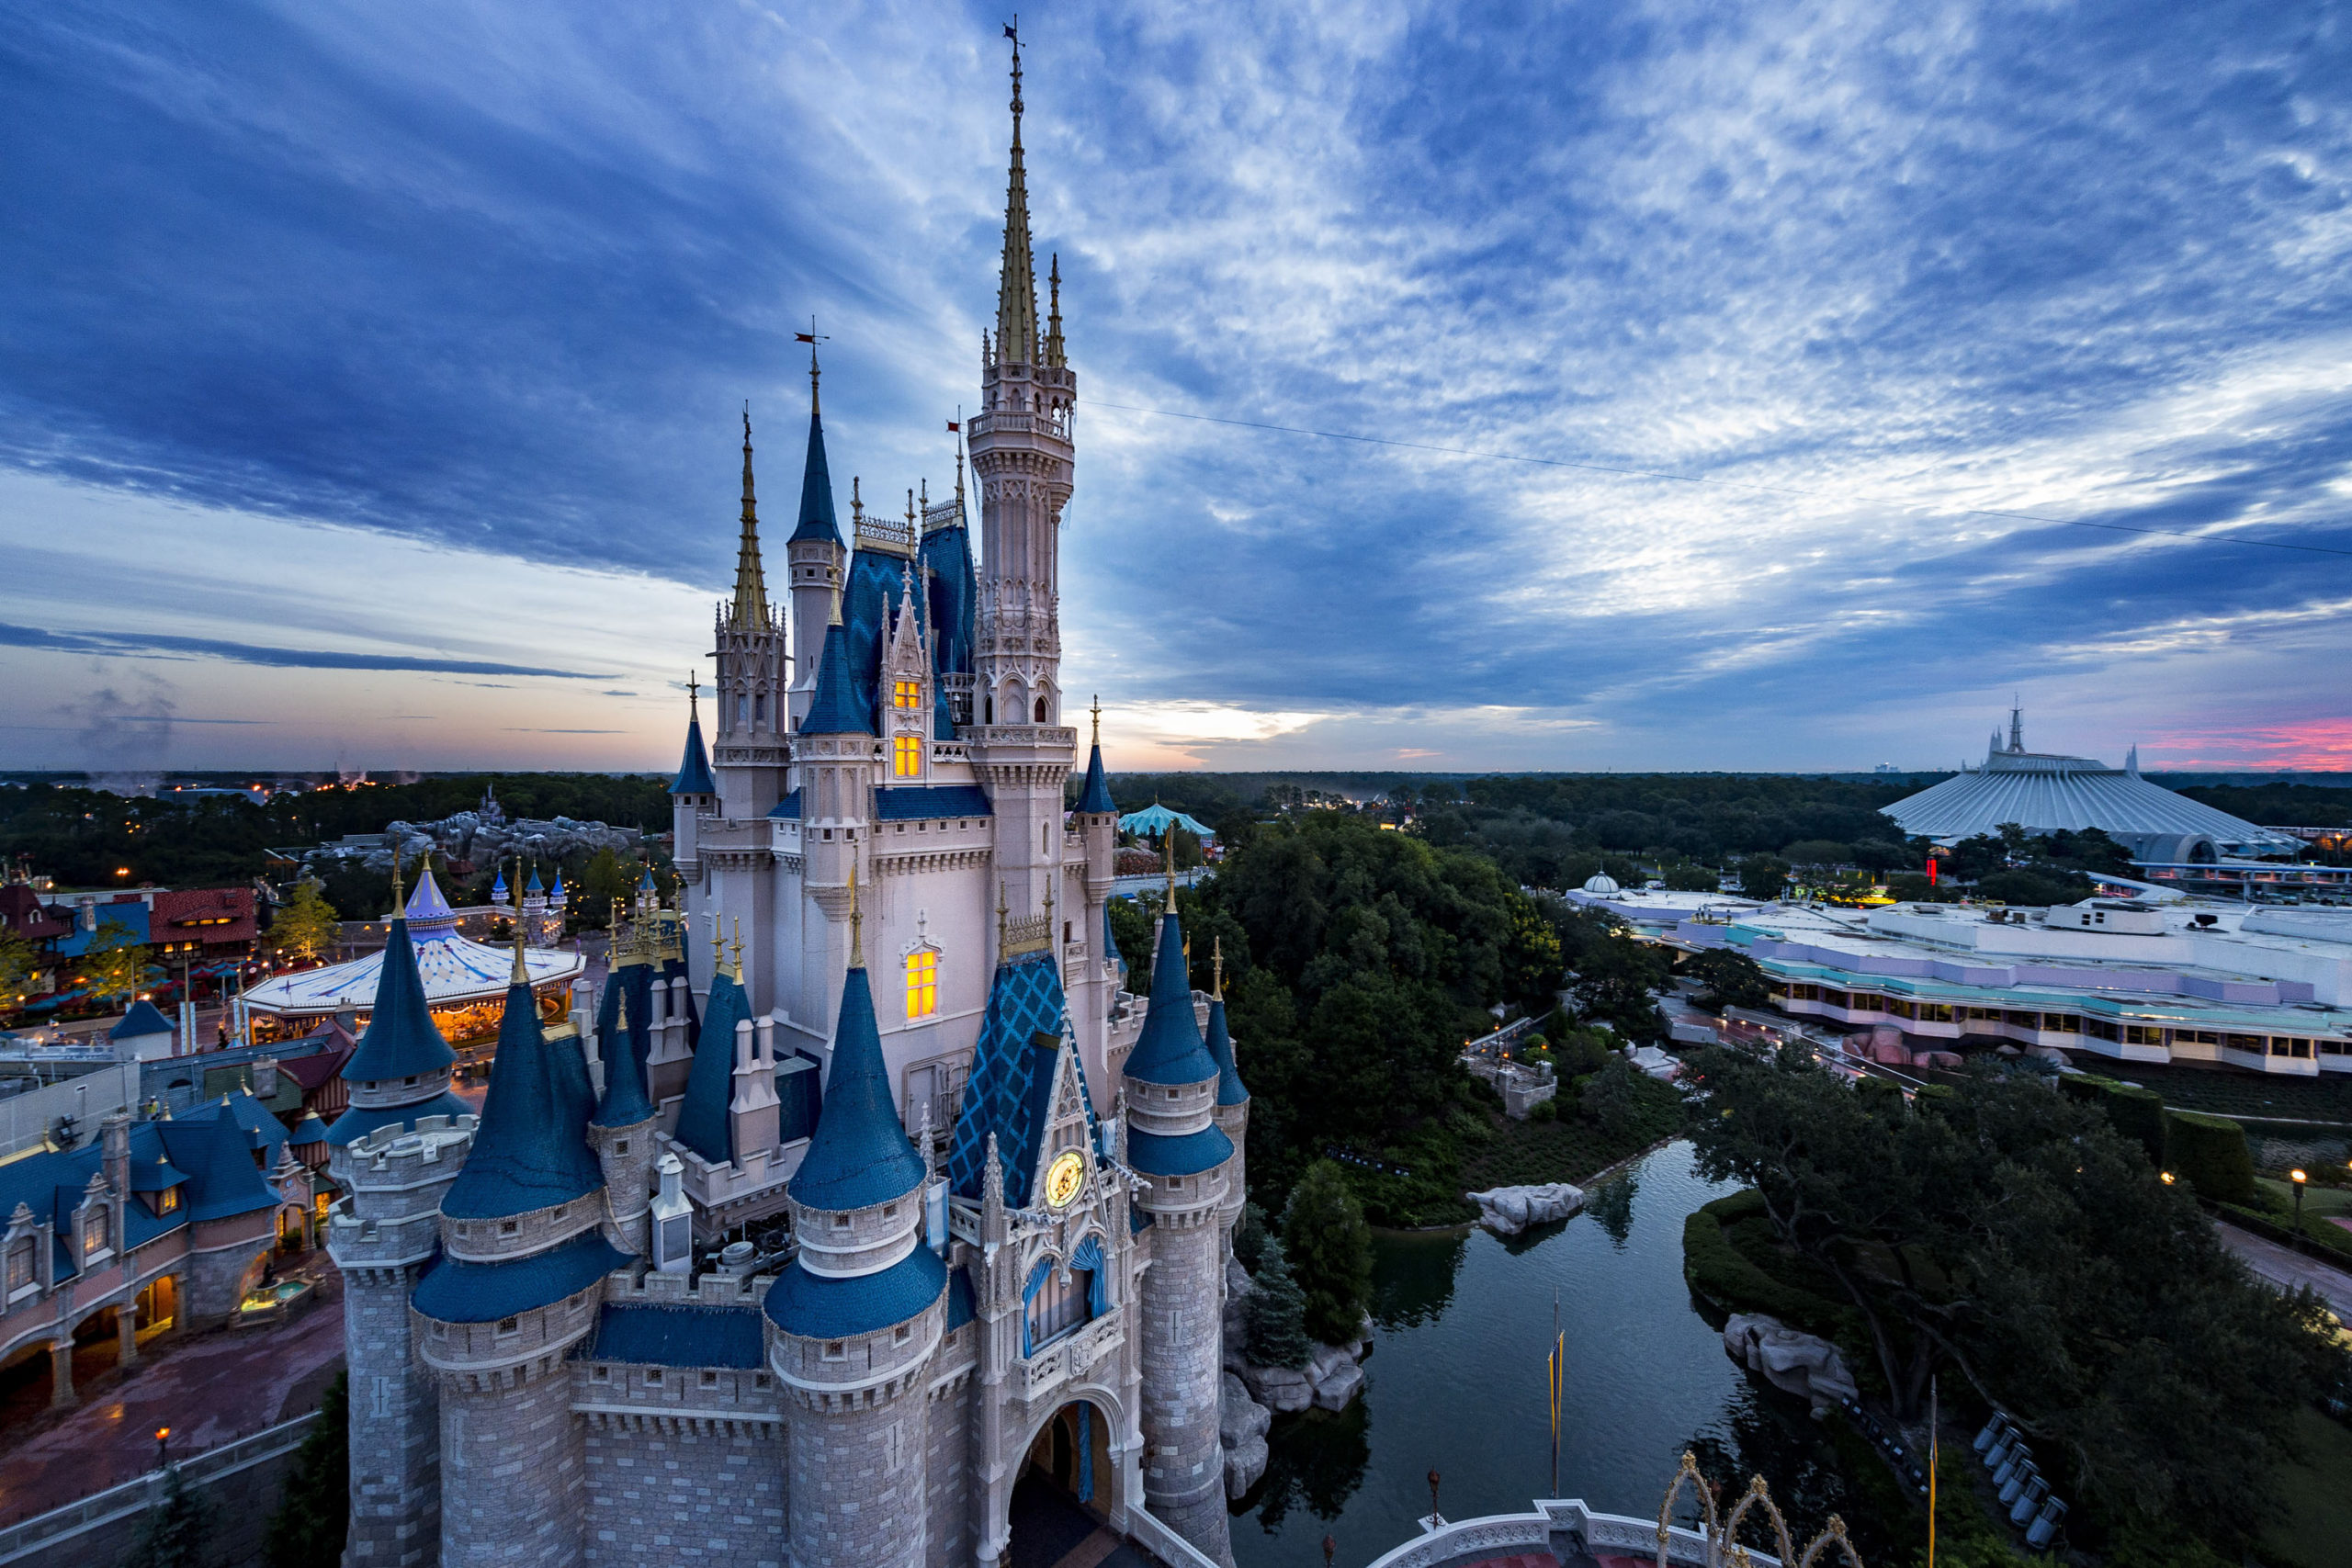 disneyworld packages christmas to new years